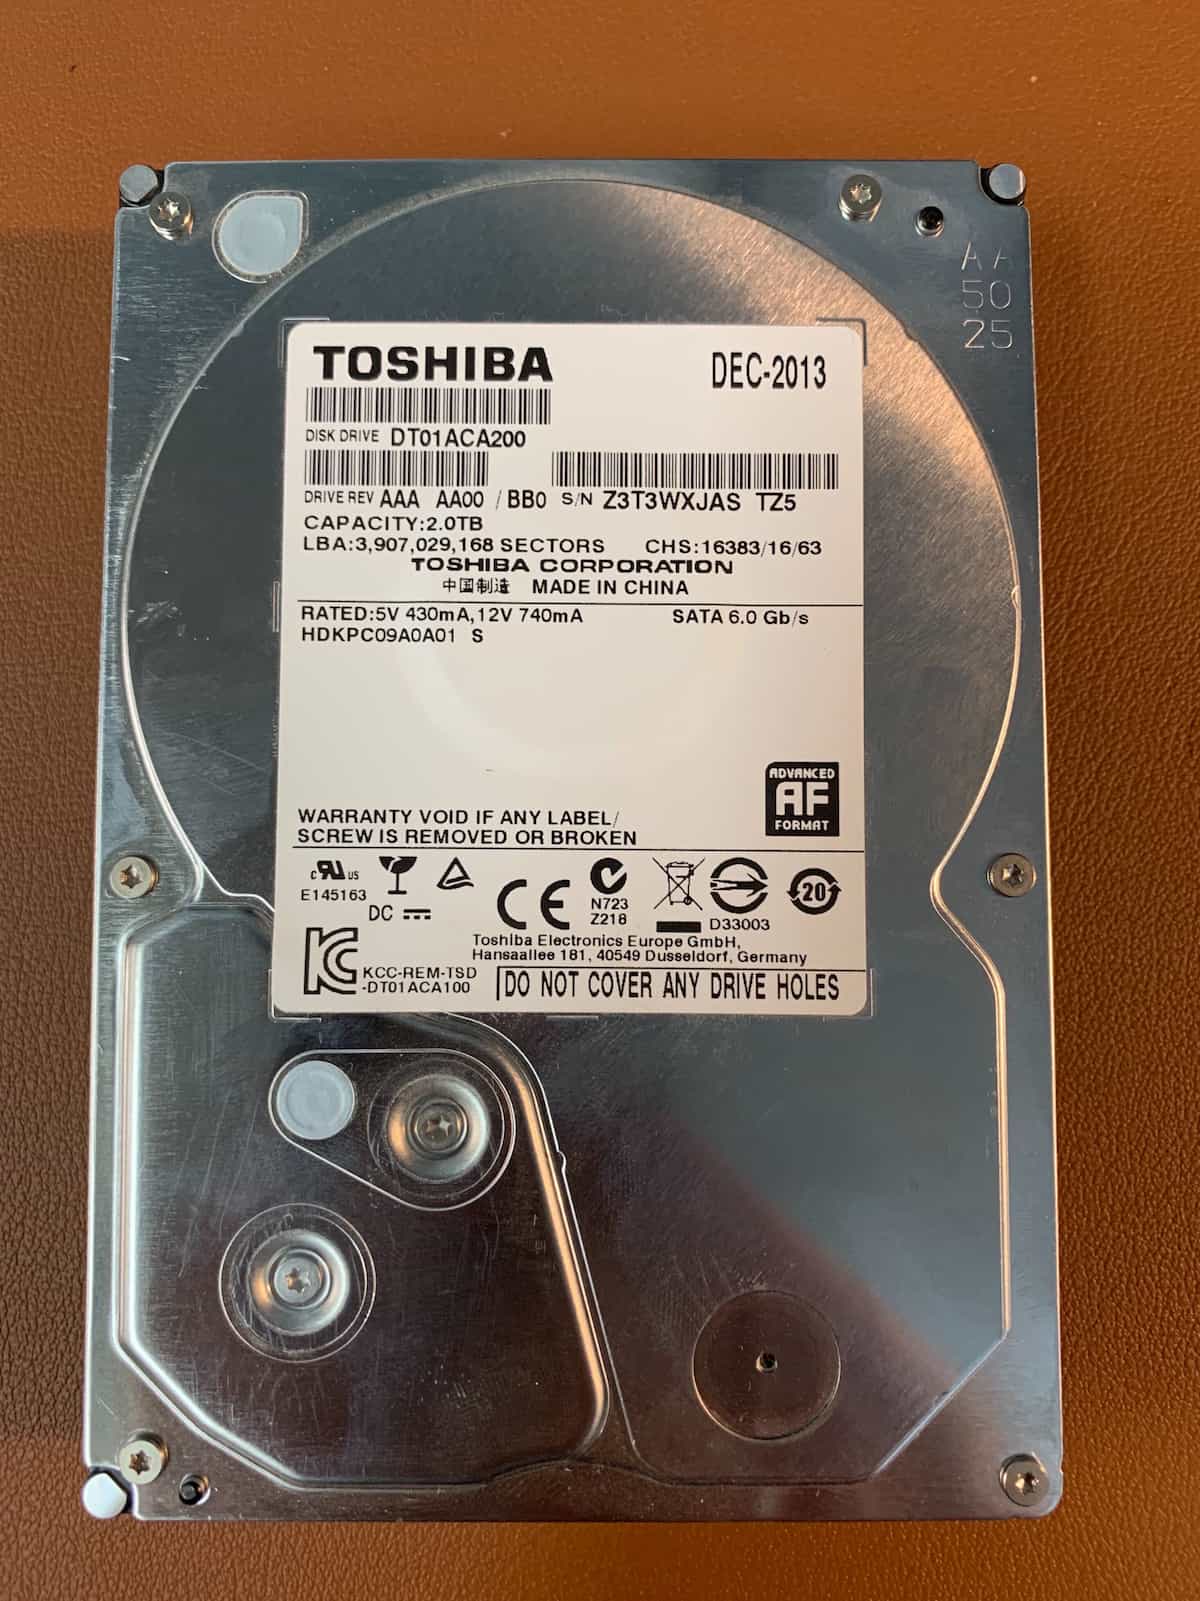 2TB Toshiba Desktop Drive that stopped working after power outage